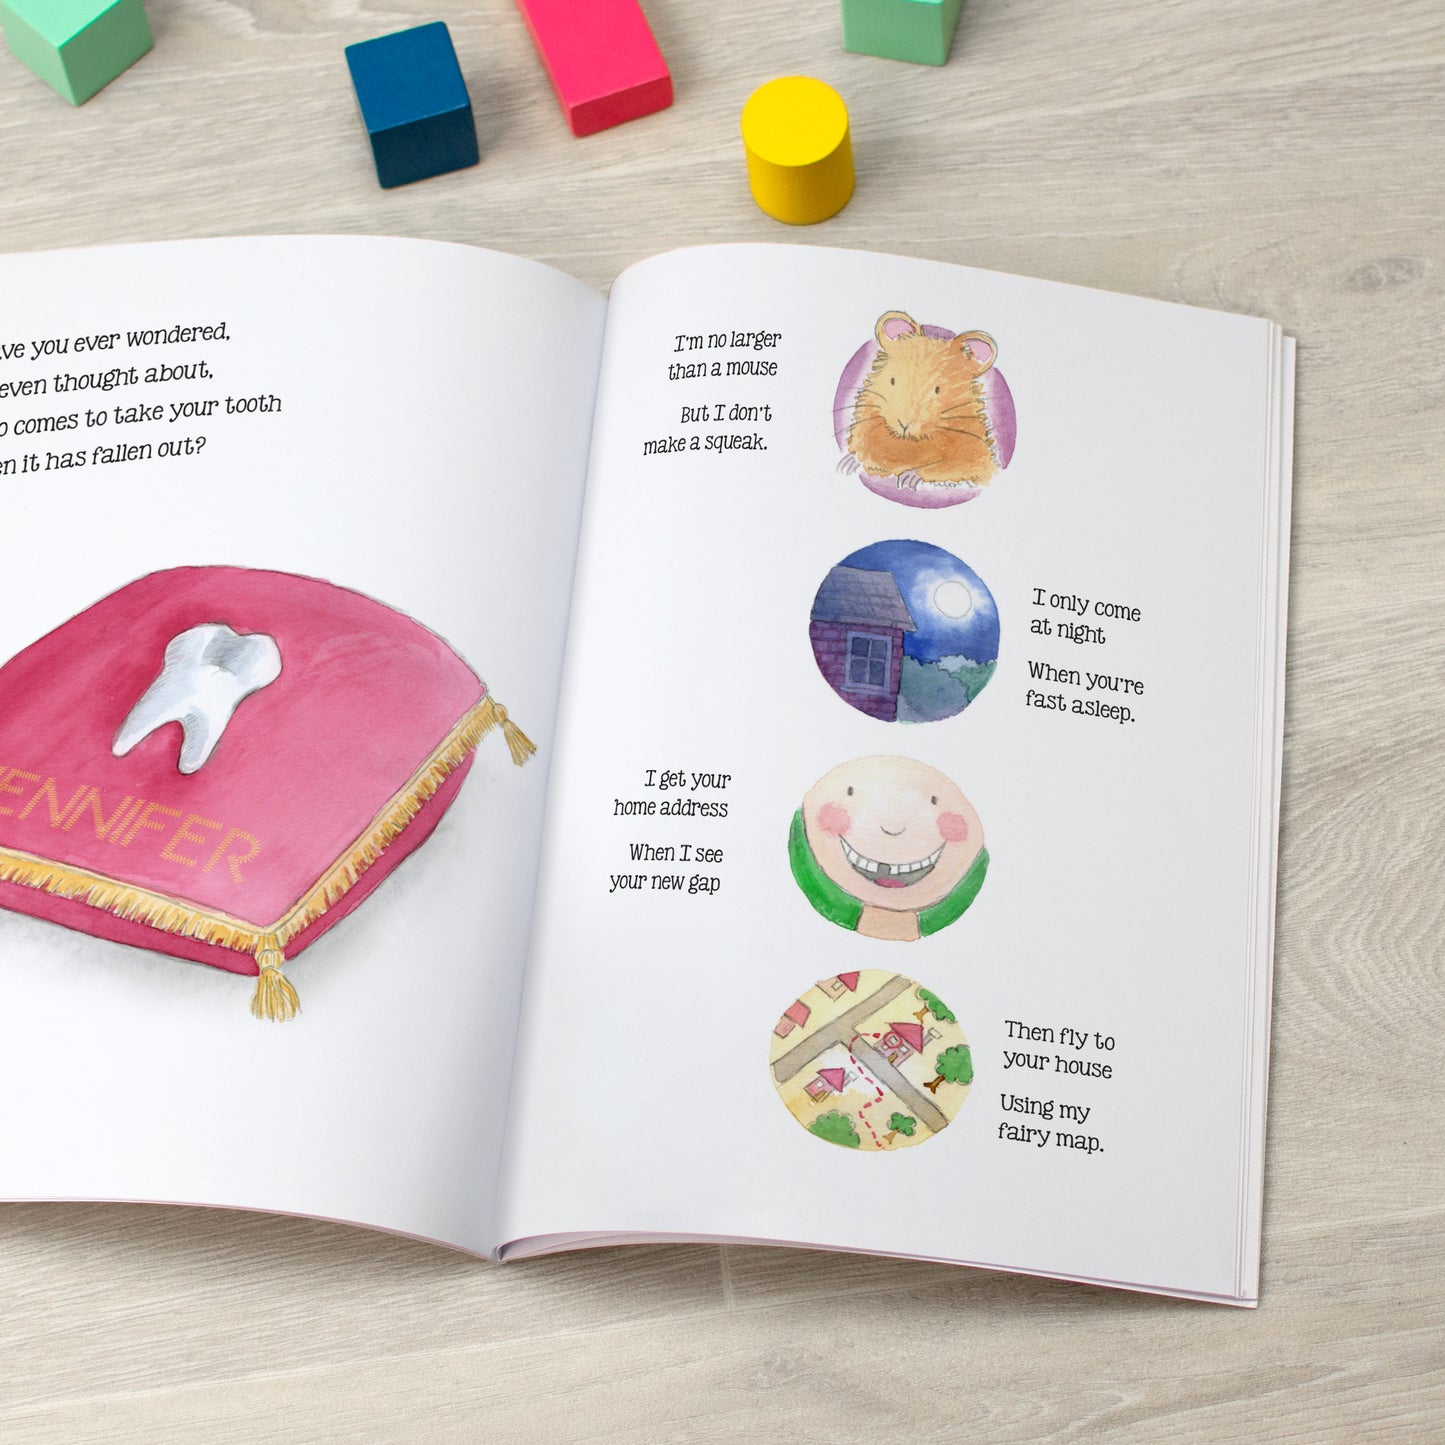 Personalised The Tooth Fairy Story Book